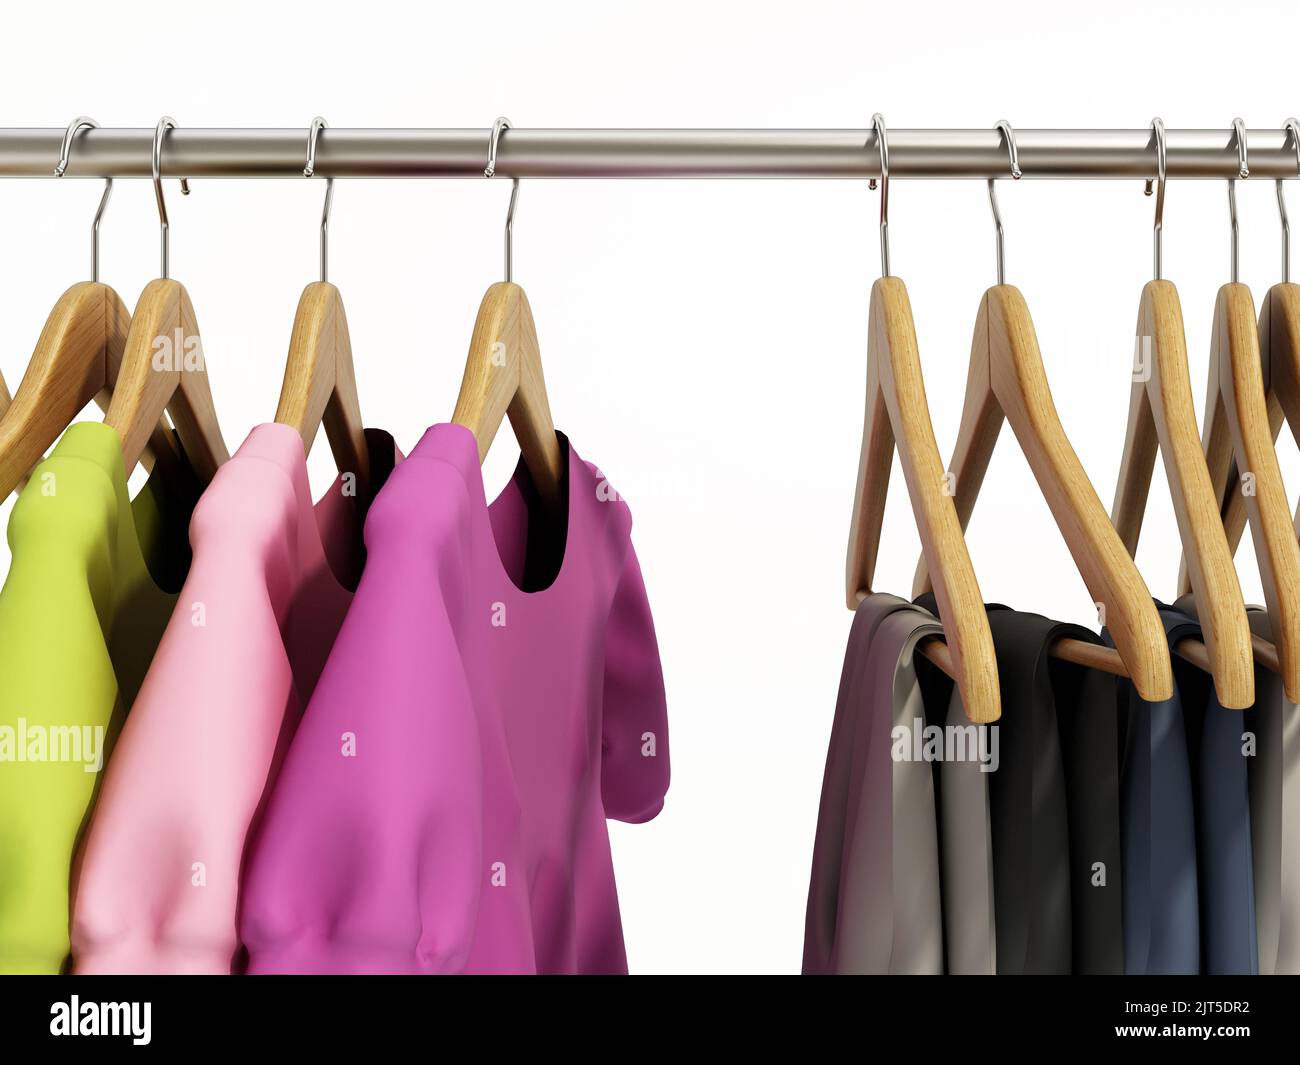 Wooden cloth hangers with clothes on the bar. 3D illustration. Stock Photo